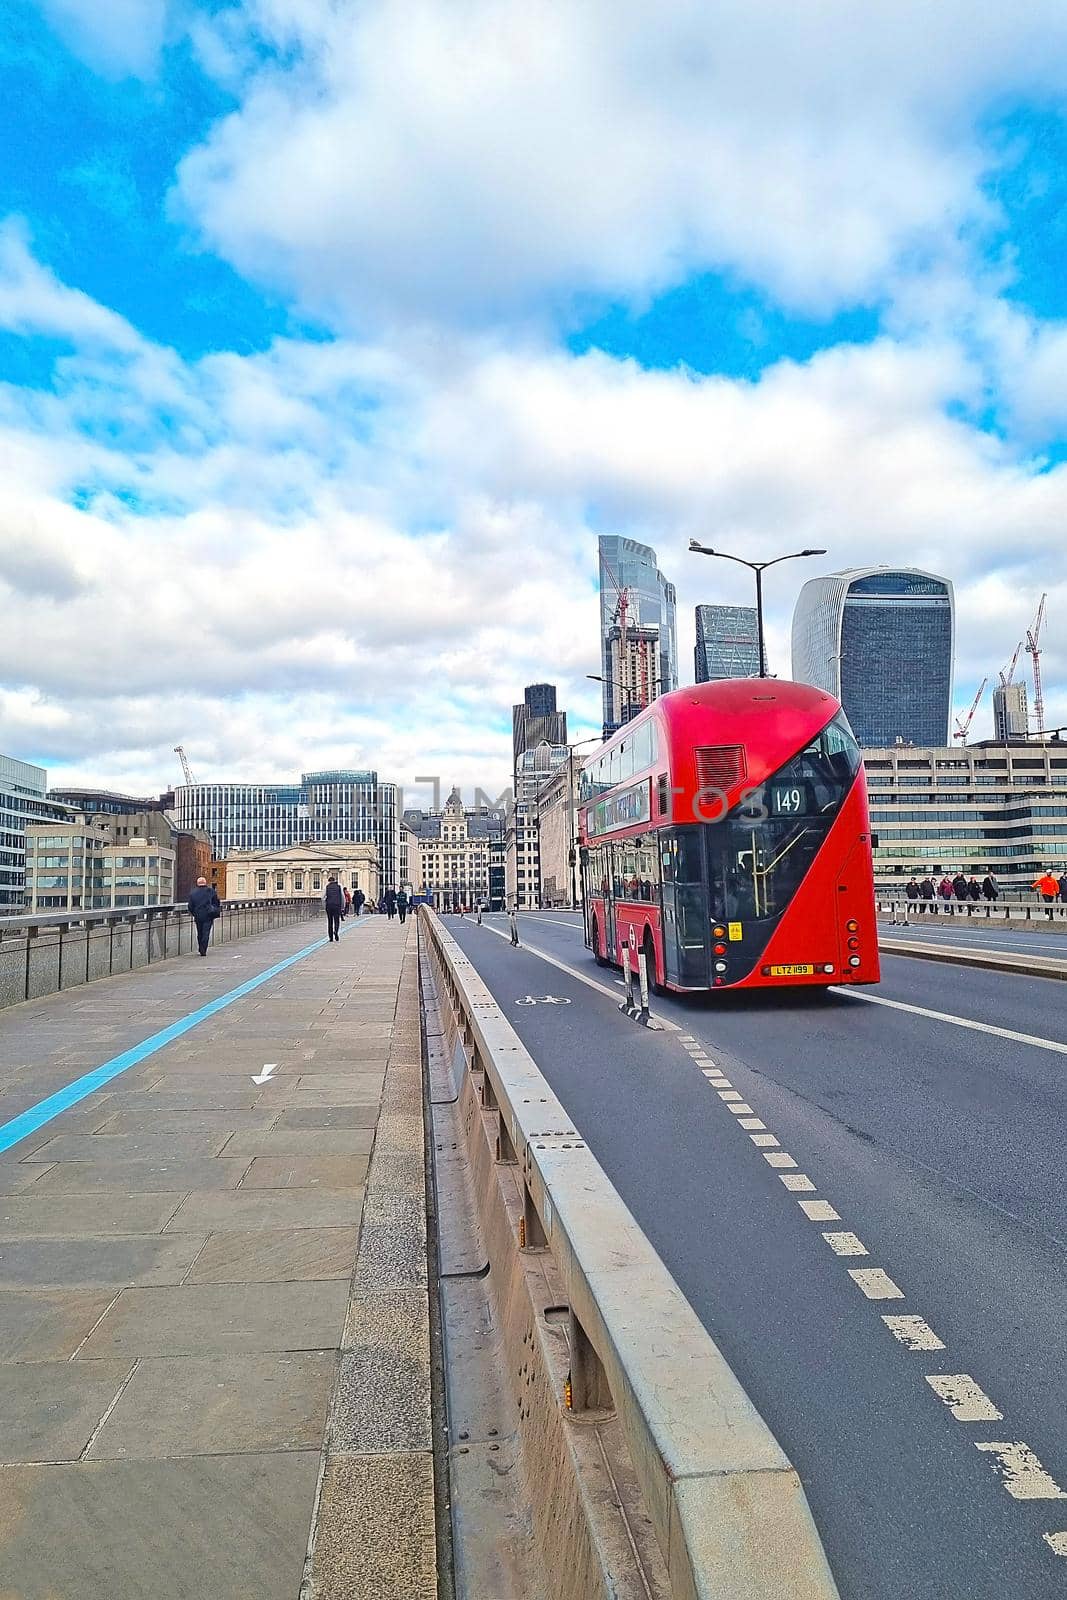 London, United Kingdom, February 4, 2022: A red double-decker bus drives over the bridge against the backdrop of tall buildings in London